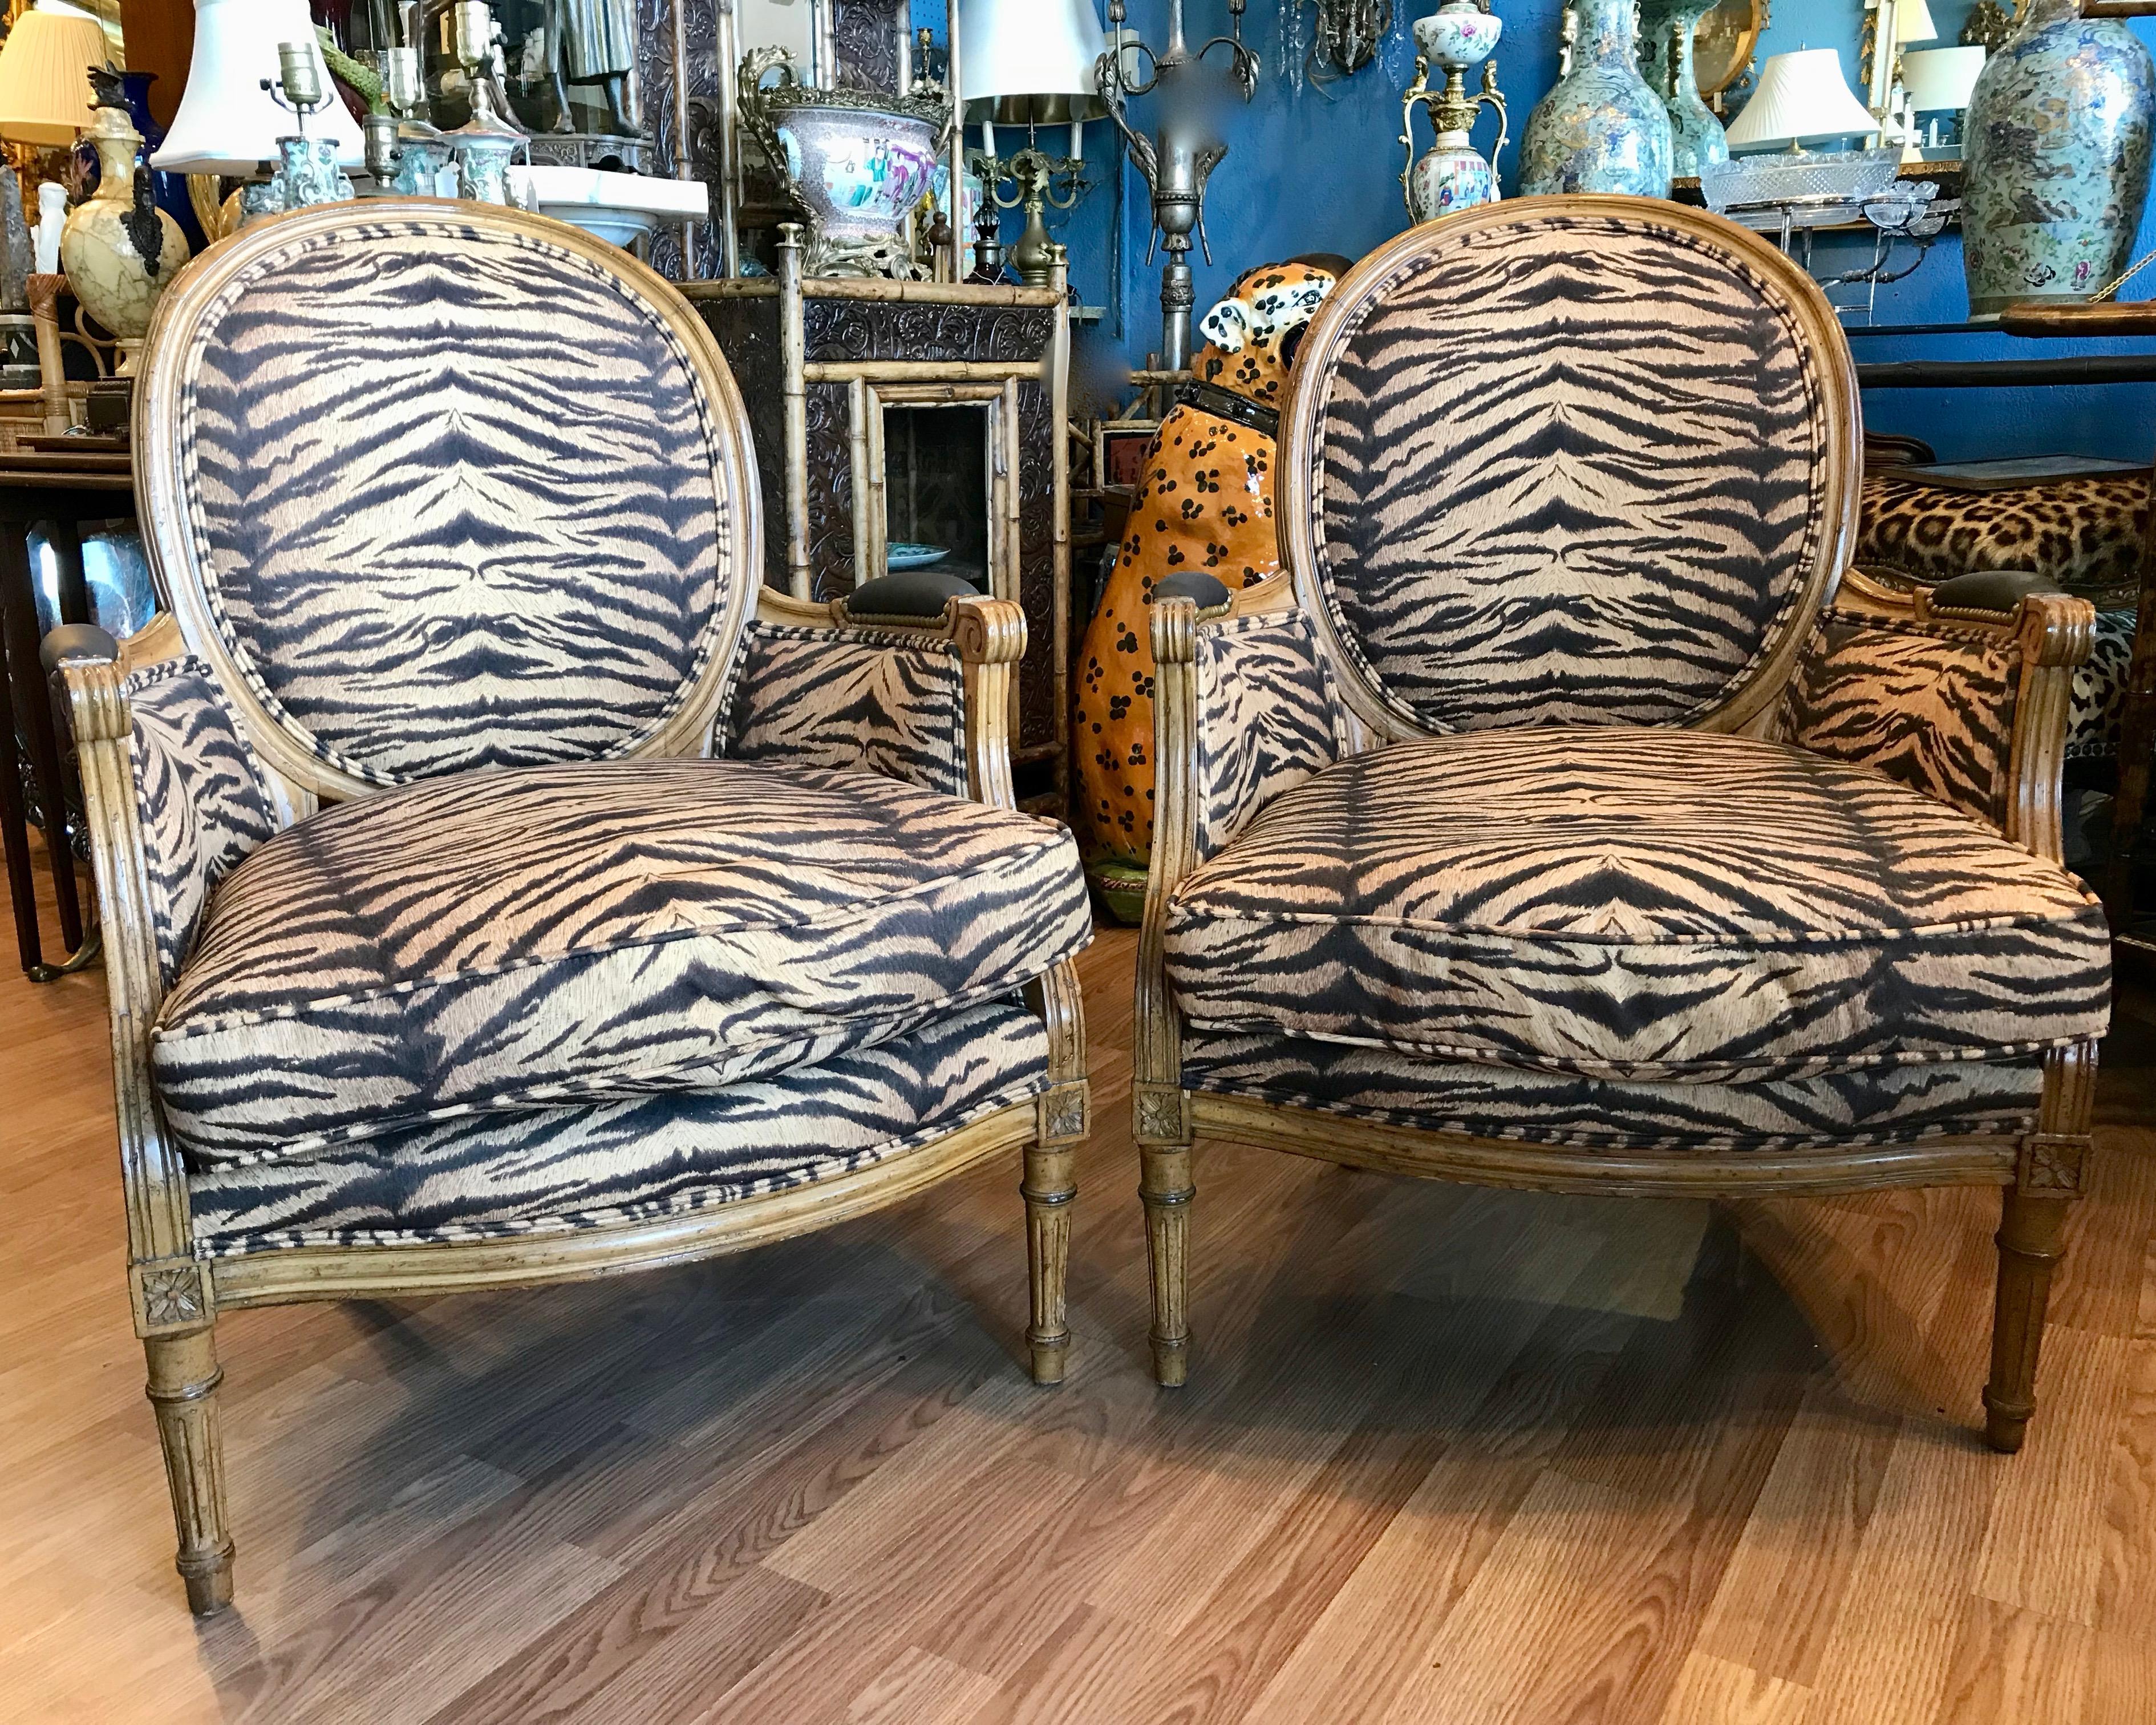 Beautifully fashioned with caned sides and appointed with faux tiger stripe fabric. This is a finely detailed pair with a nail head accented leather covered
arm rest and loose cushions 
A visually stunning pair of chairs